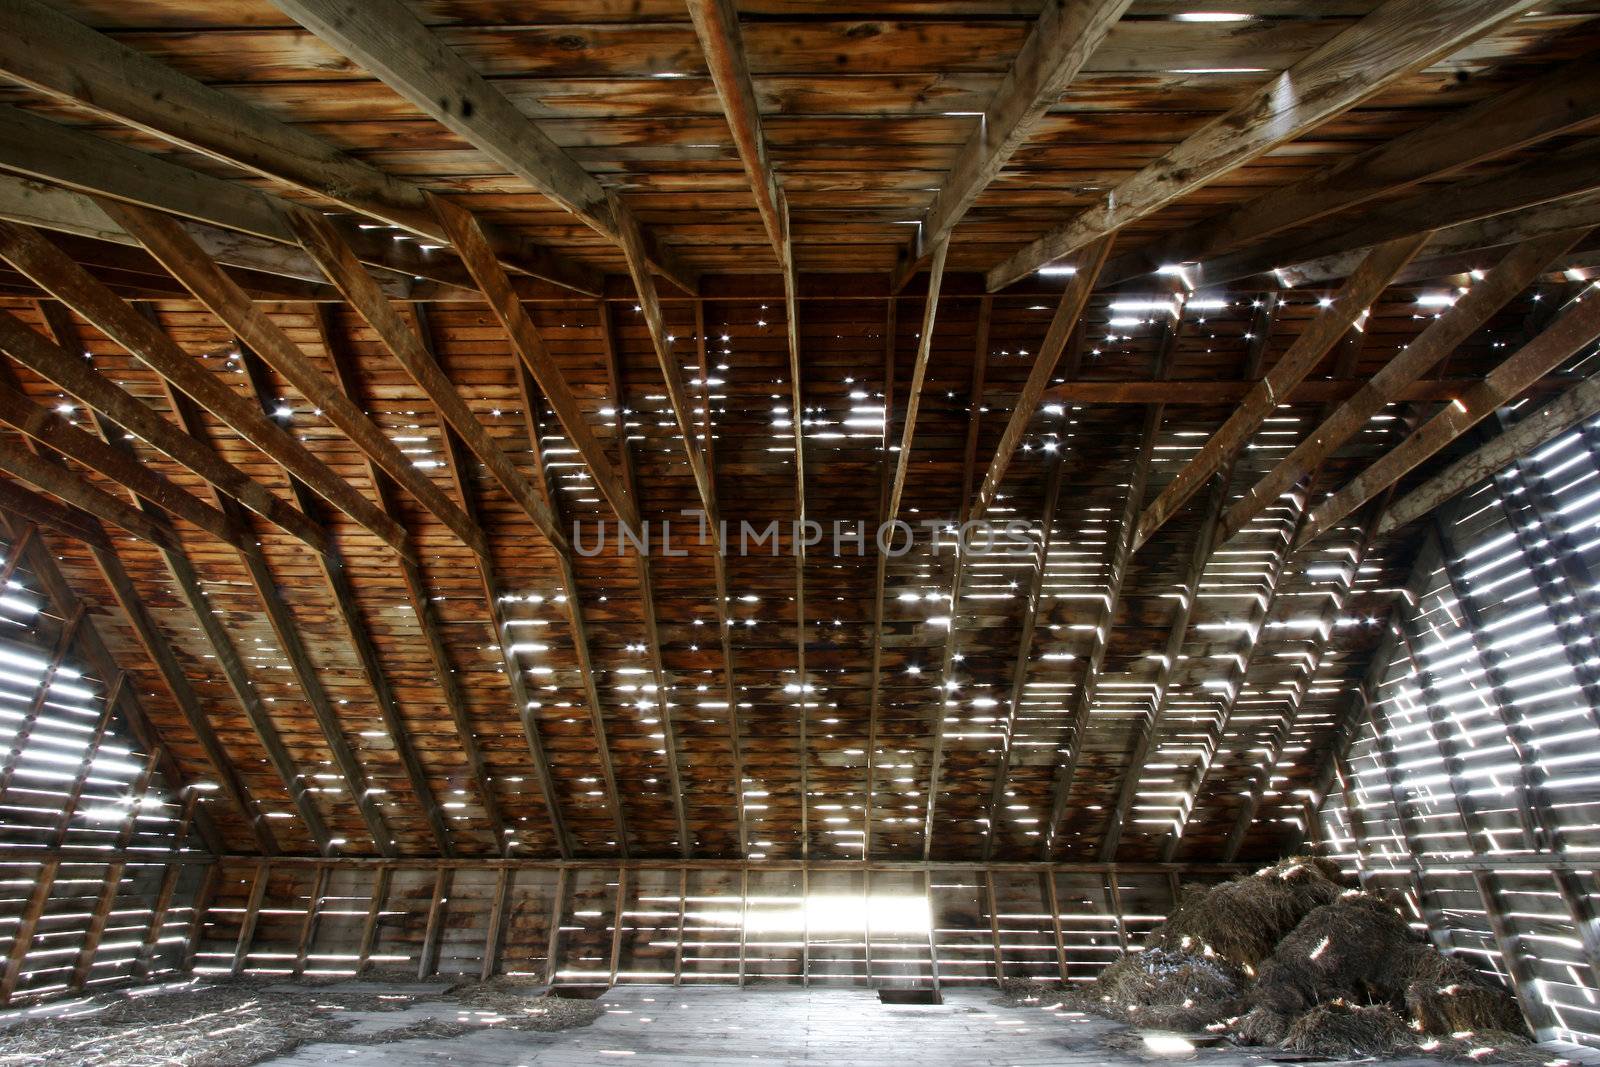 Interior of an old barn